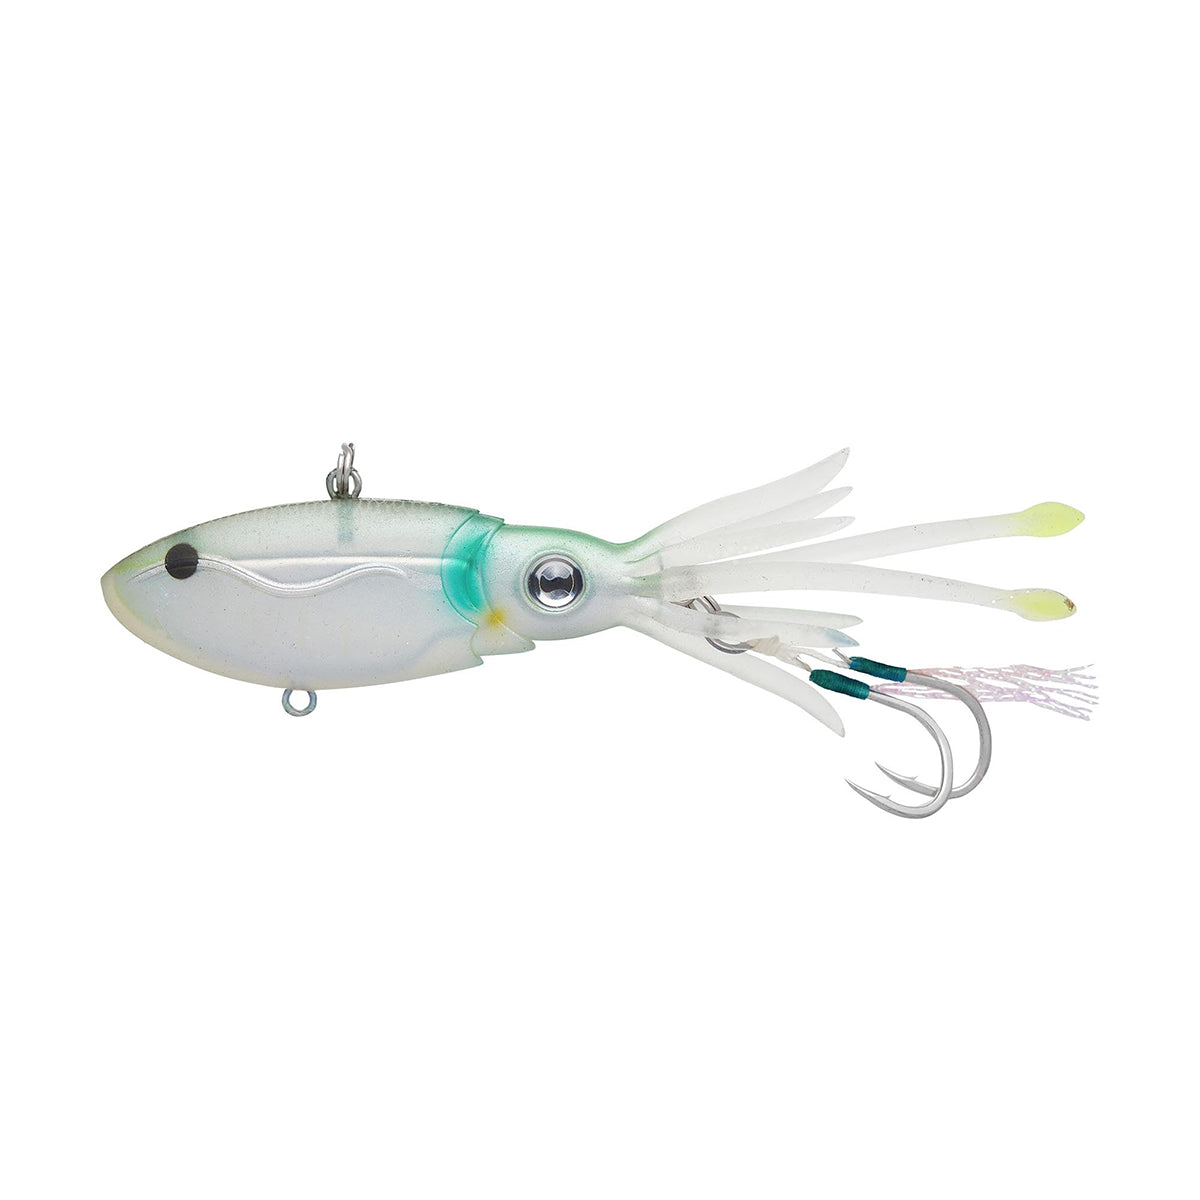 Nomad Squidtrex Soft Vibe Lure-Lure - Blades & Vibe-Nomad-HGS - Holo Ghost Shad-55mm - 5g-Fishing Station